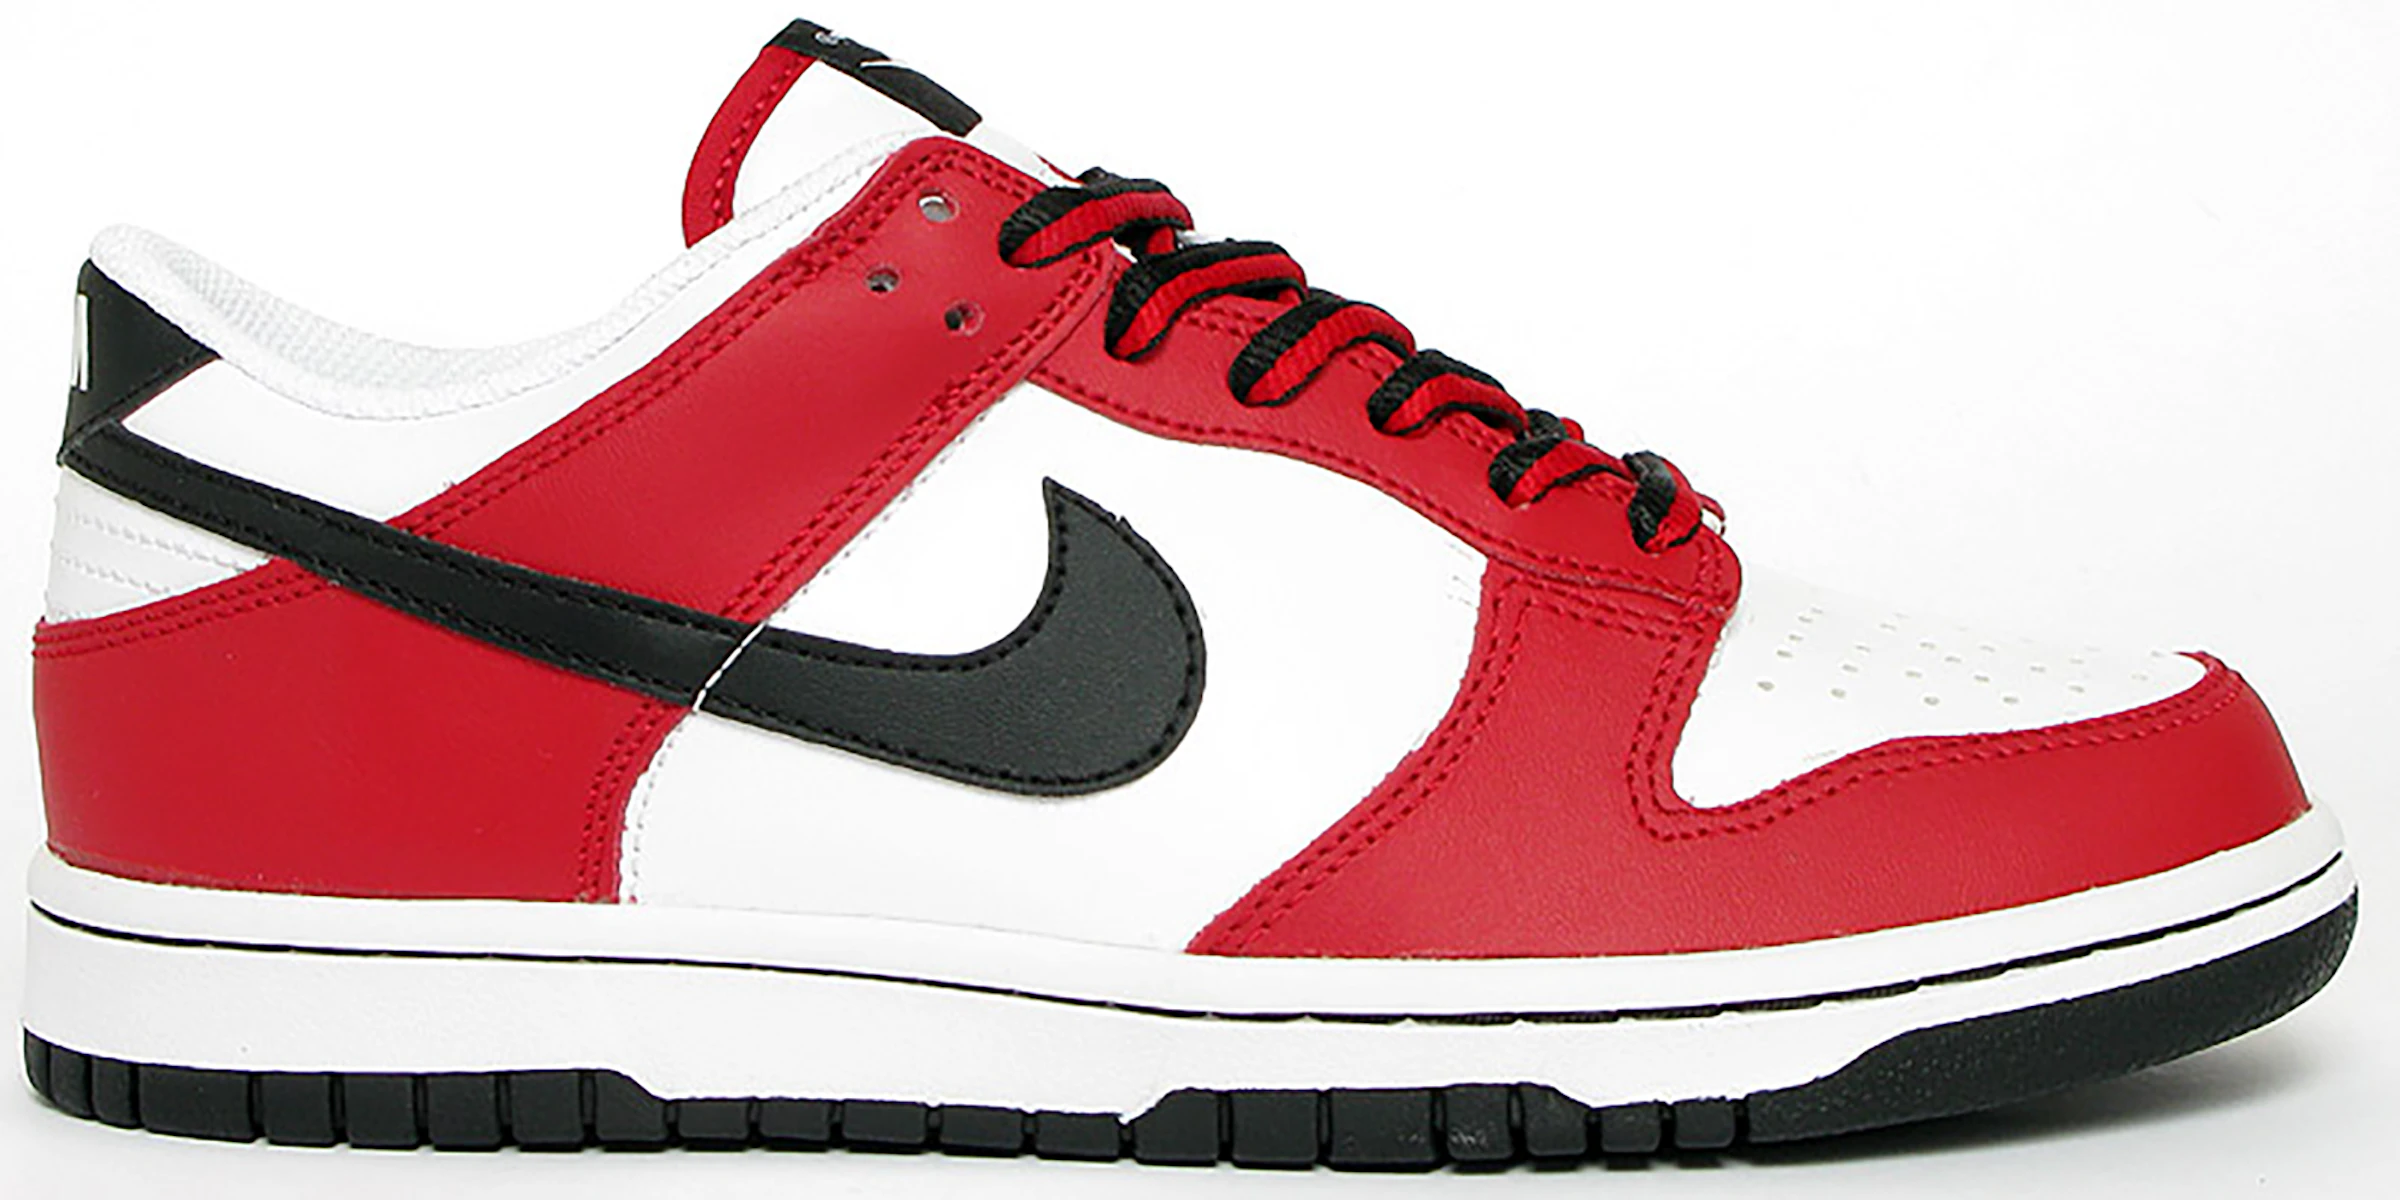 Nike Dunk Low Championship Red DD1391-600 | vlr.eng.br